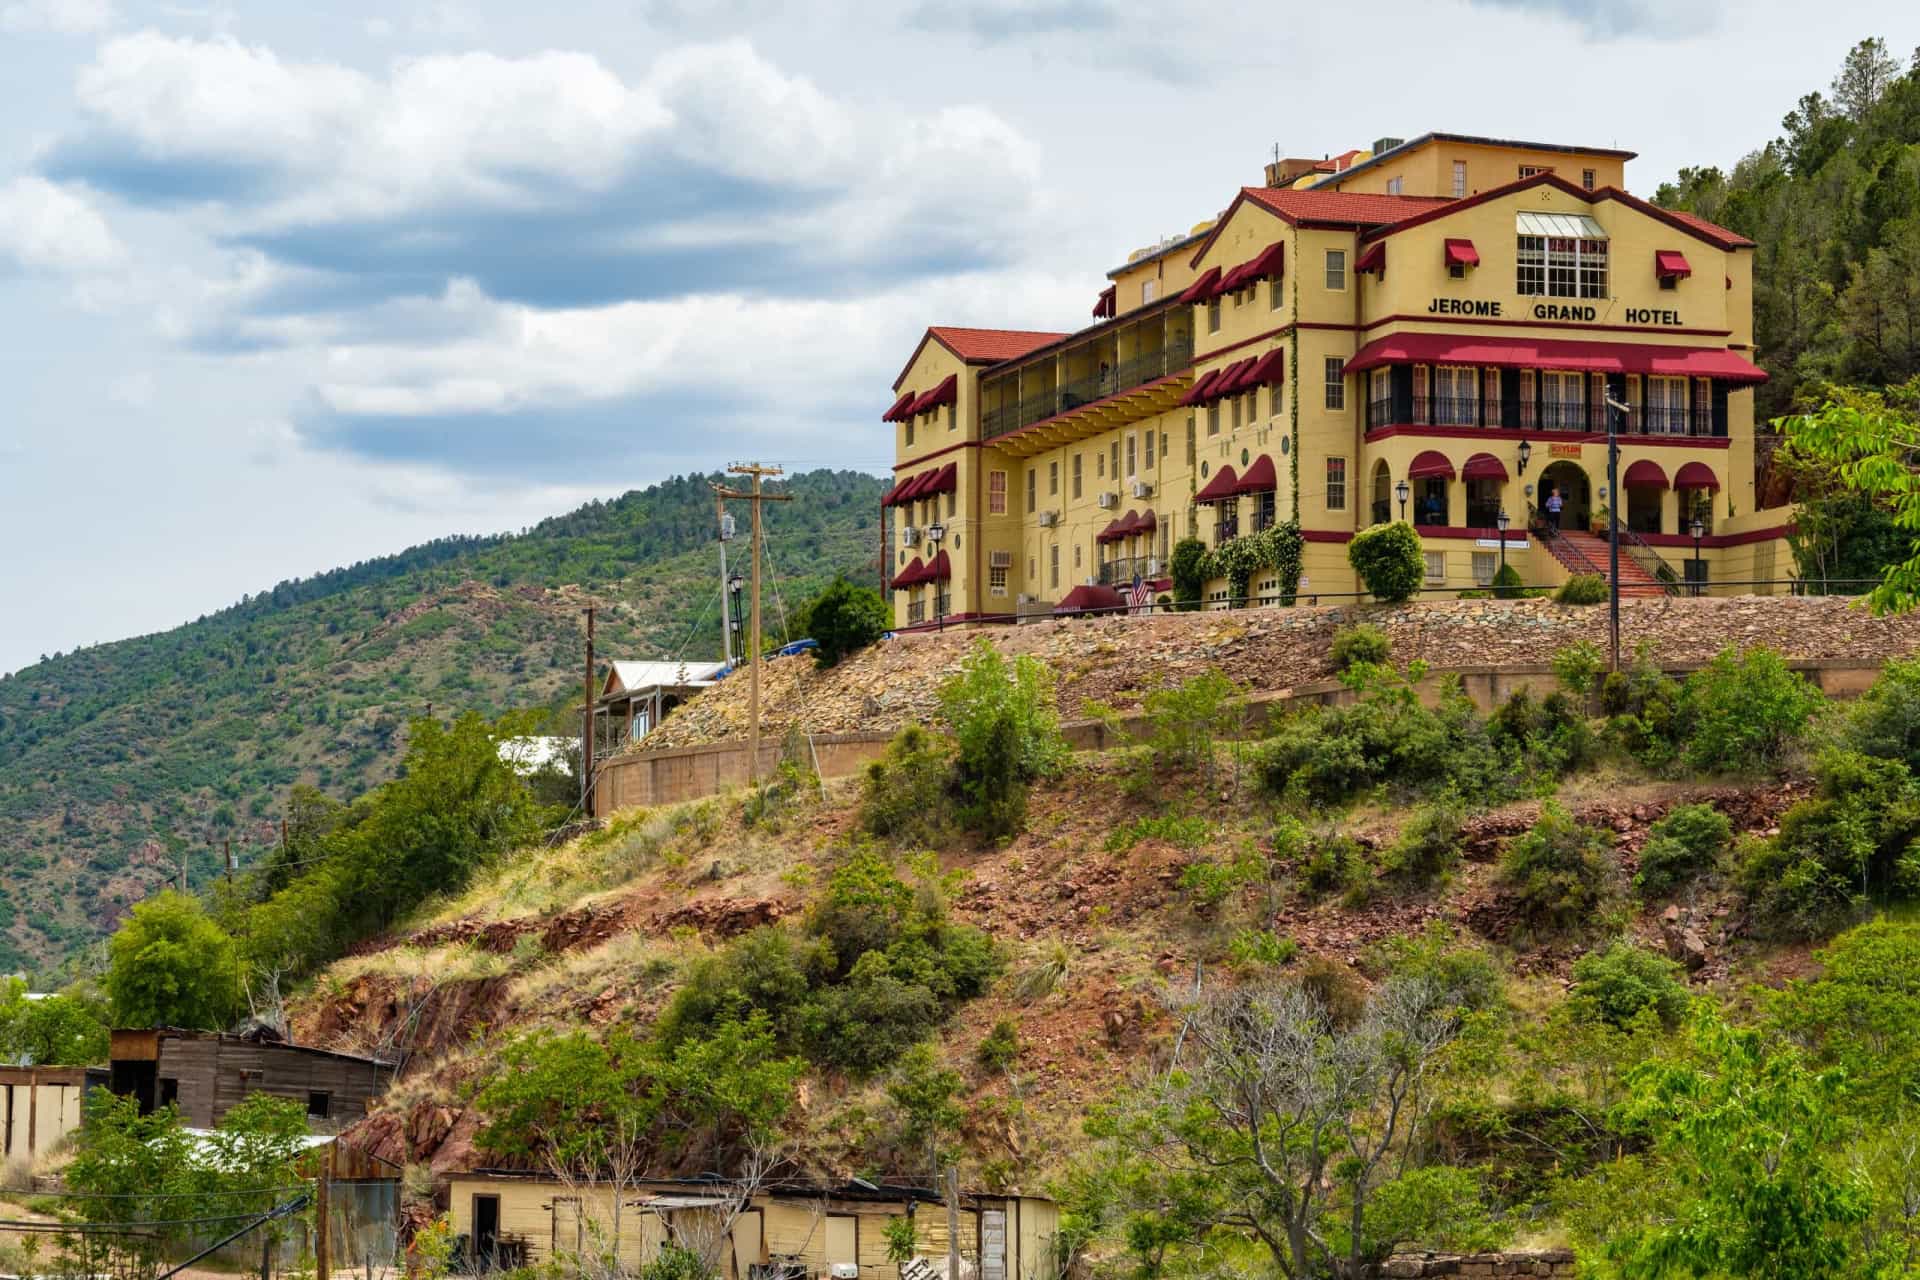 <p>The Jerome Grand <a href="https://www.starsinsider.com/travel/353630/the-most-haunted-hotels-around-the-world" rel="noopener">Hotel</a> was originally built as the United Verde Hospital. It is estimated that more than 9,000 people died onsite during its years as a hospital. Sights of hospital gurneys, the sound of voices, and even the ghost of a cat have been reported. </p>